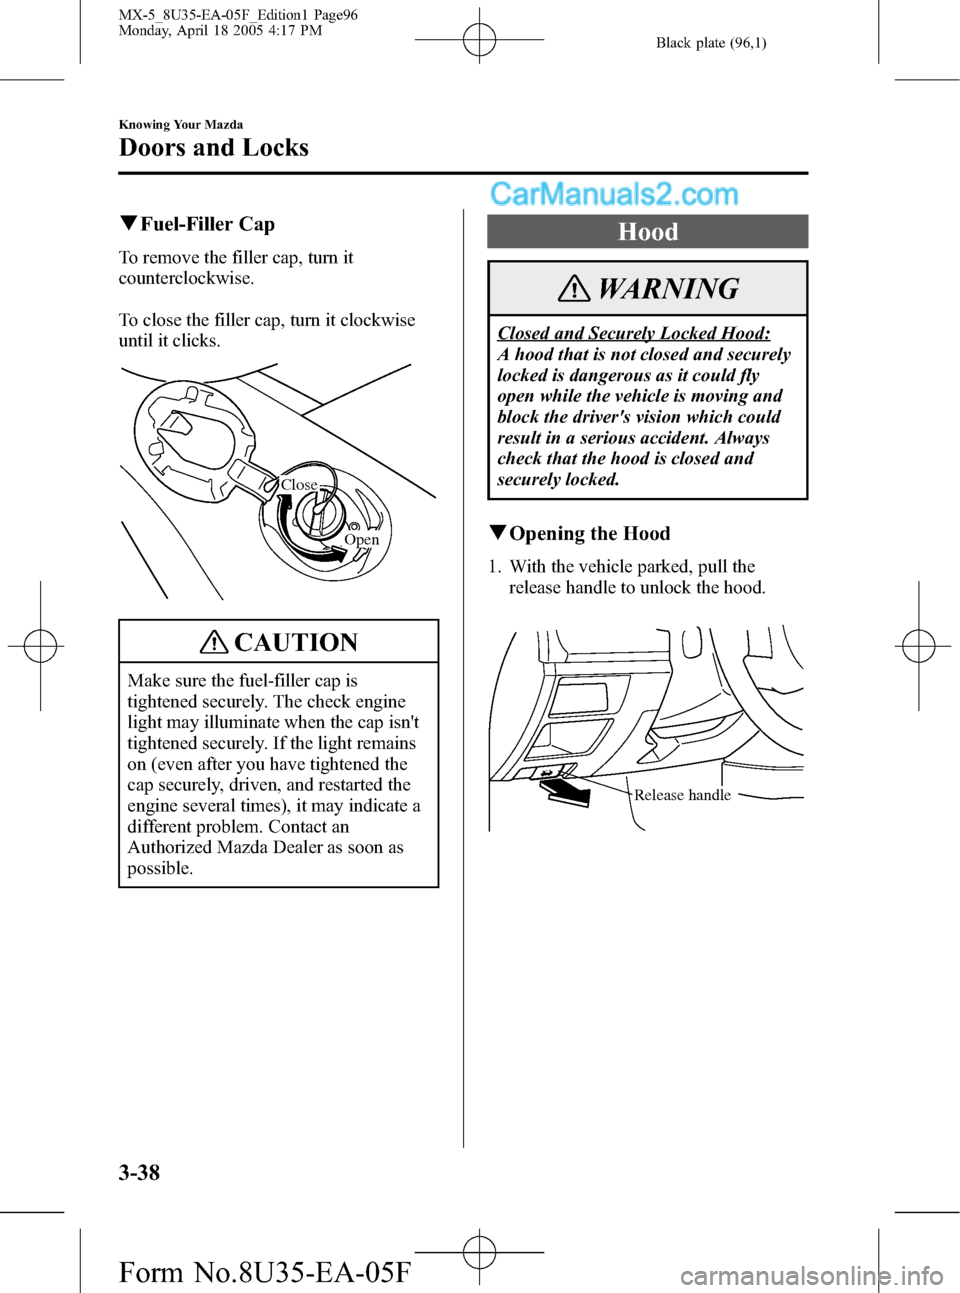 MAZDA MODEL MX-5 2006  Owners Manual (in English) Black plate (96,1)
qFuel-Filler Cap
To remove the filler cap, turn it
counterclockwise.
To close the filler cap, turn it clockwise
until it clicks.
Close
Open
CAUTION
Make sure the fuel-filler cap is
